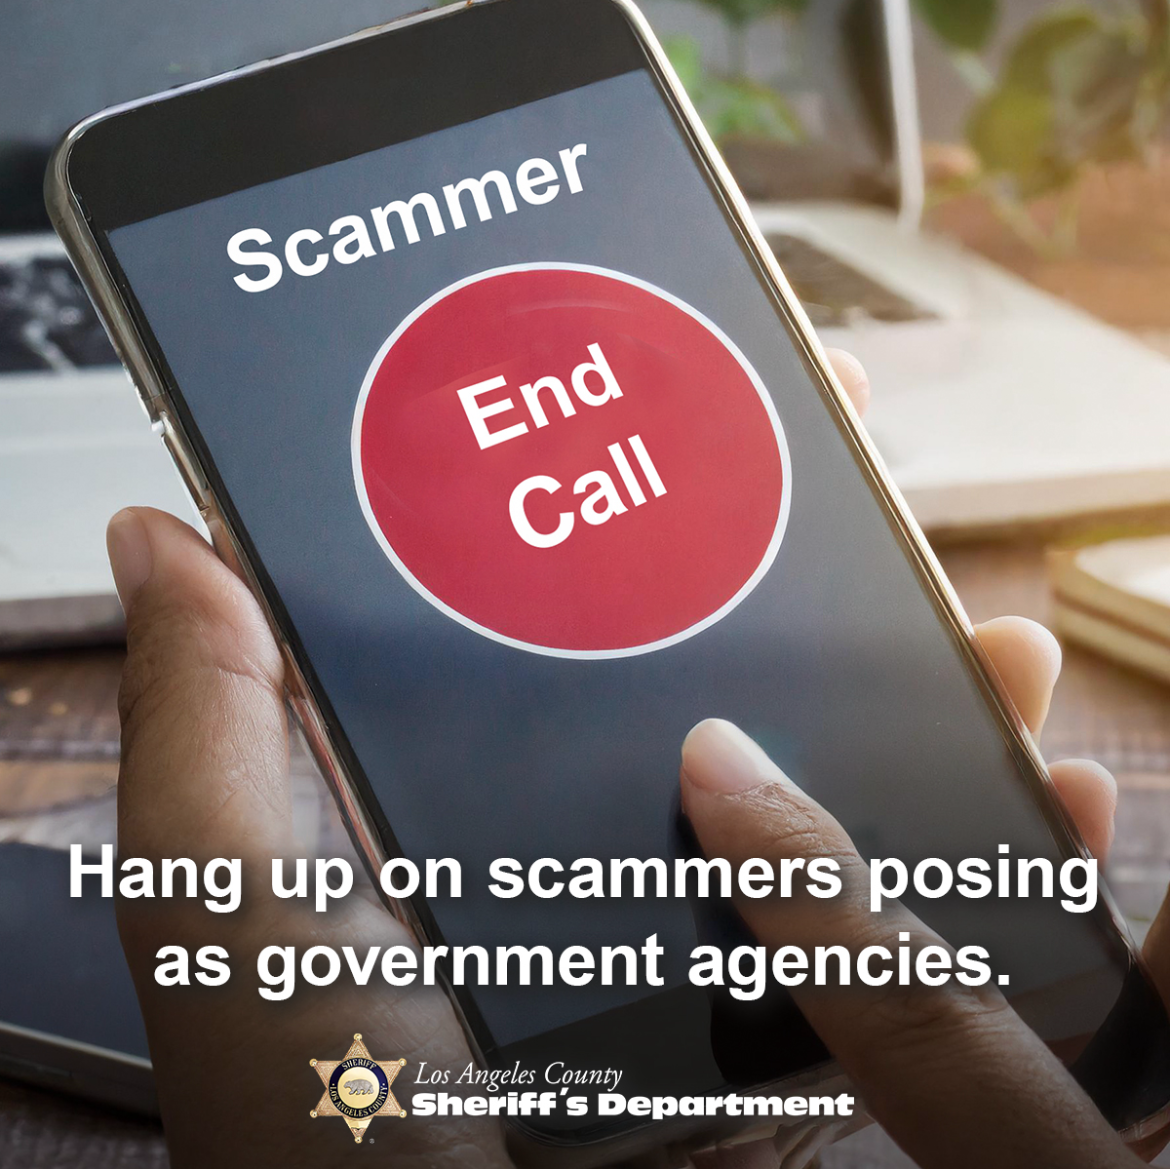 A hand holding a cell phone; on the screen, the caller ID says "Scammer" with a large red "End Call" button below